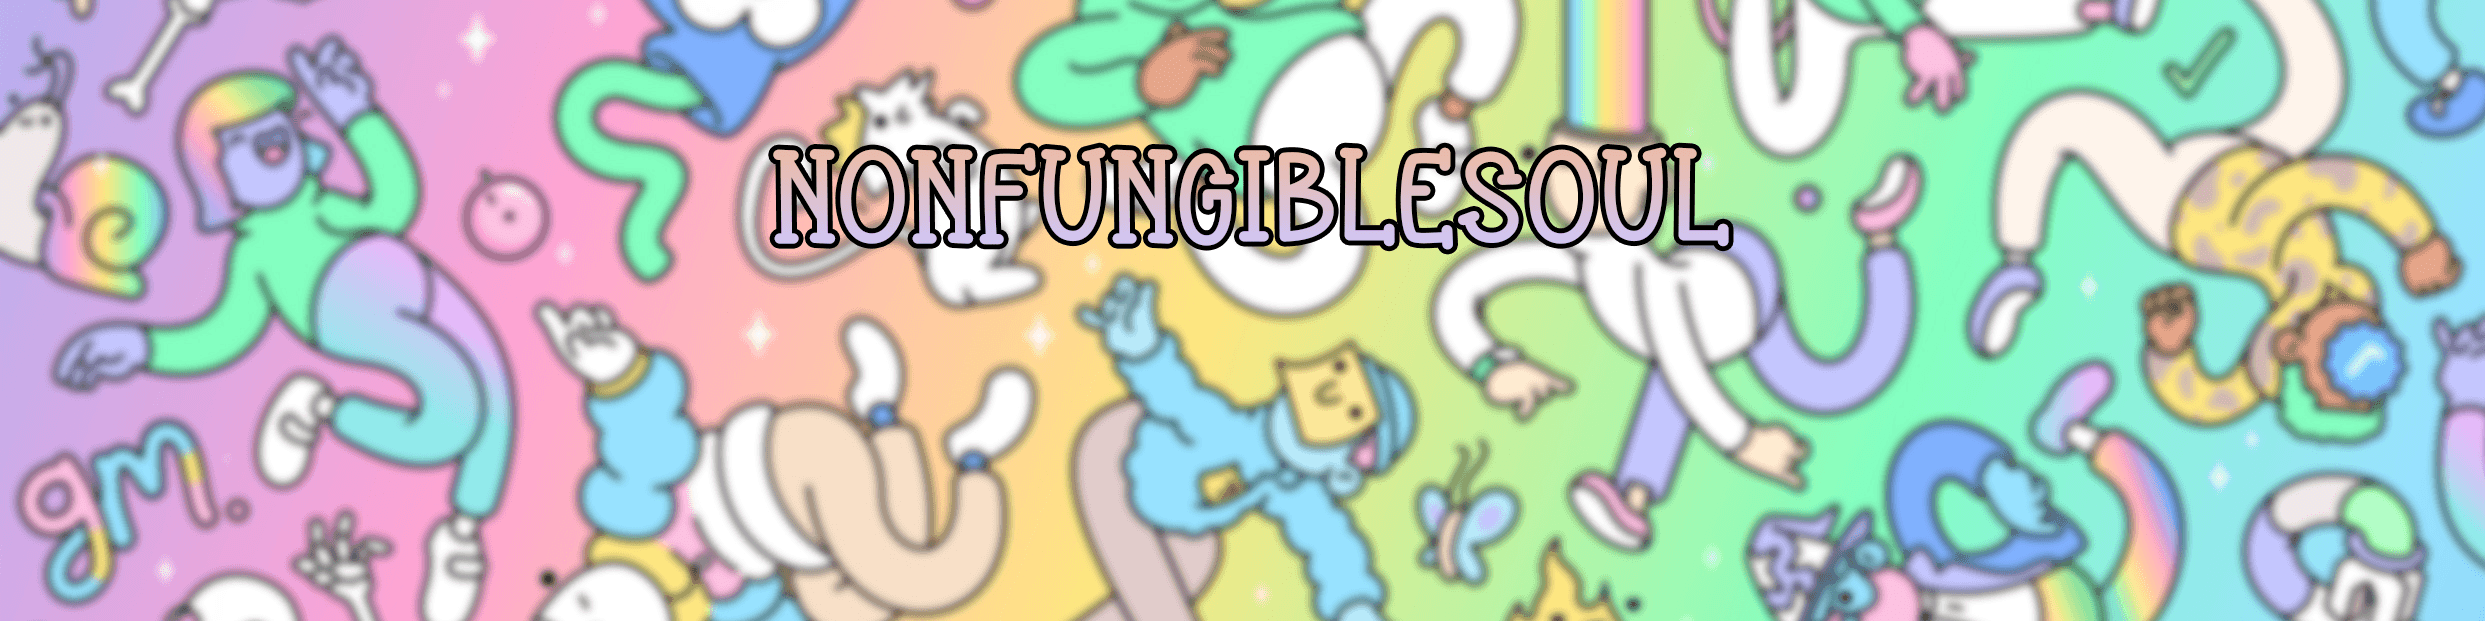 NonFungibleSoul banner